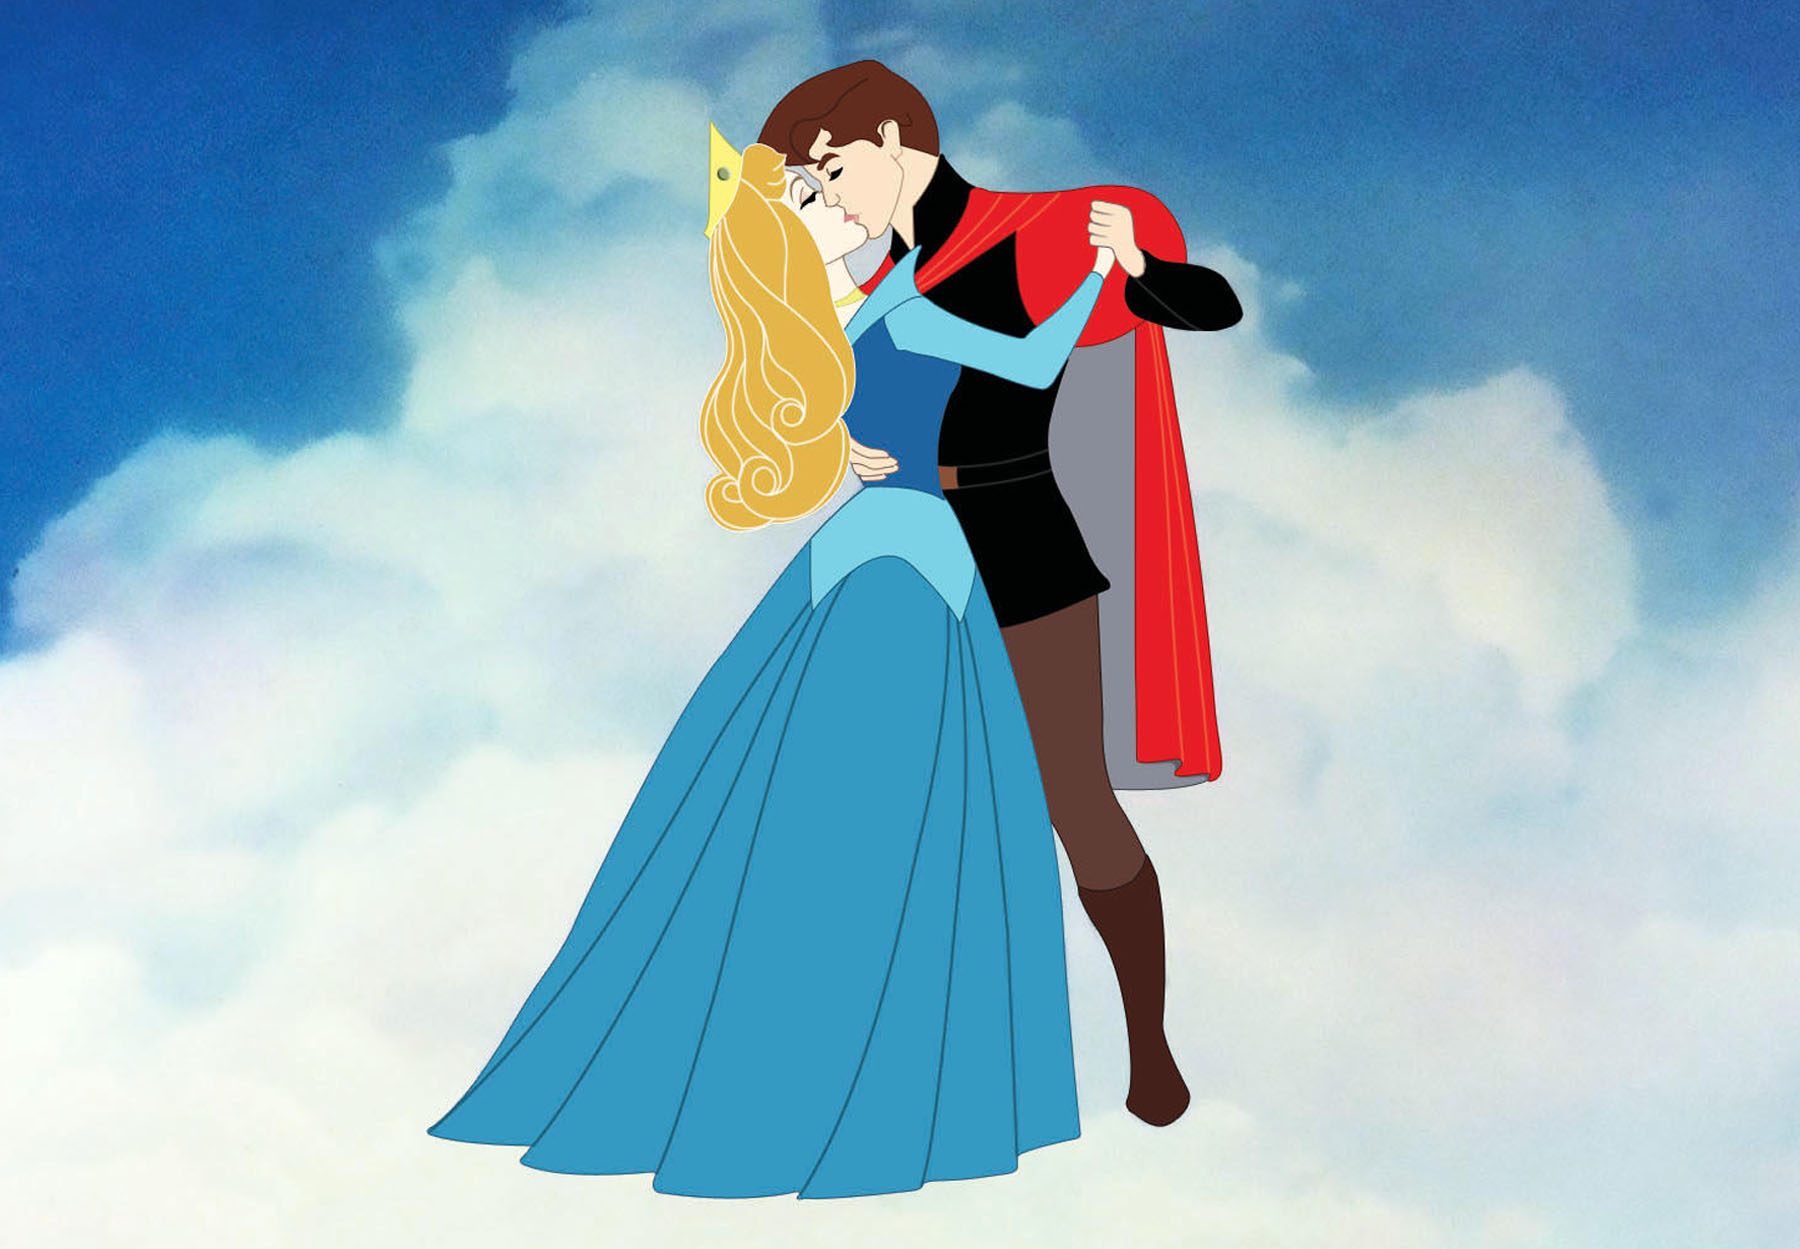 12 Things to Know about Disney's 'Sleeping Beauty' and the Art of ...